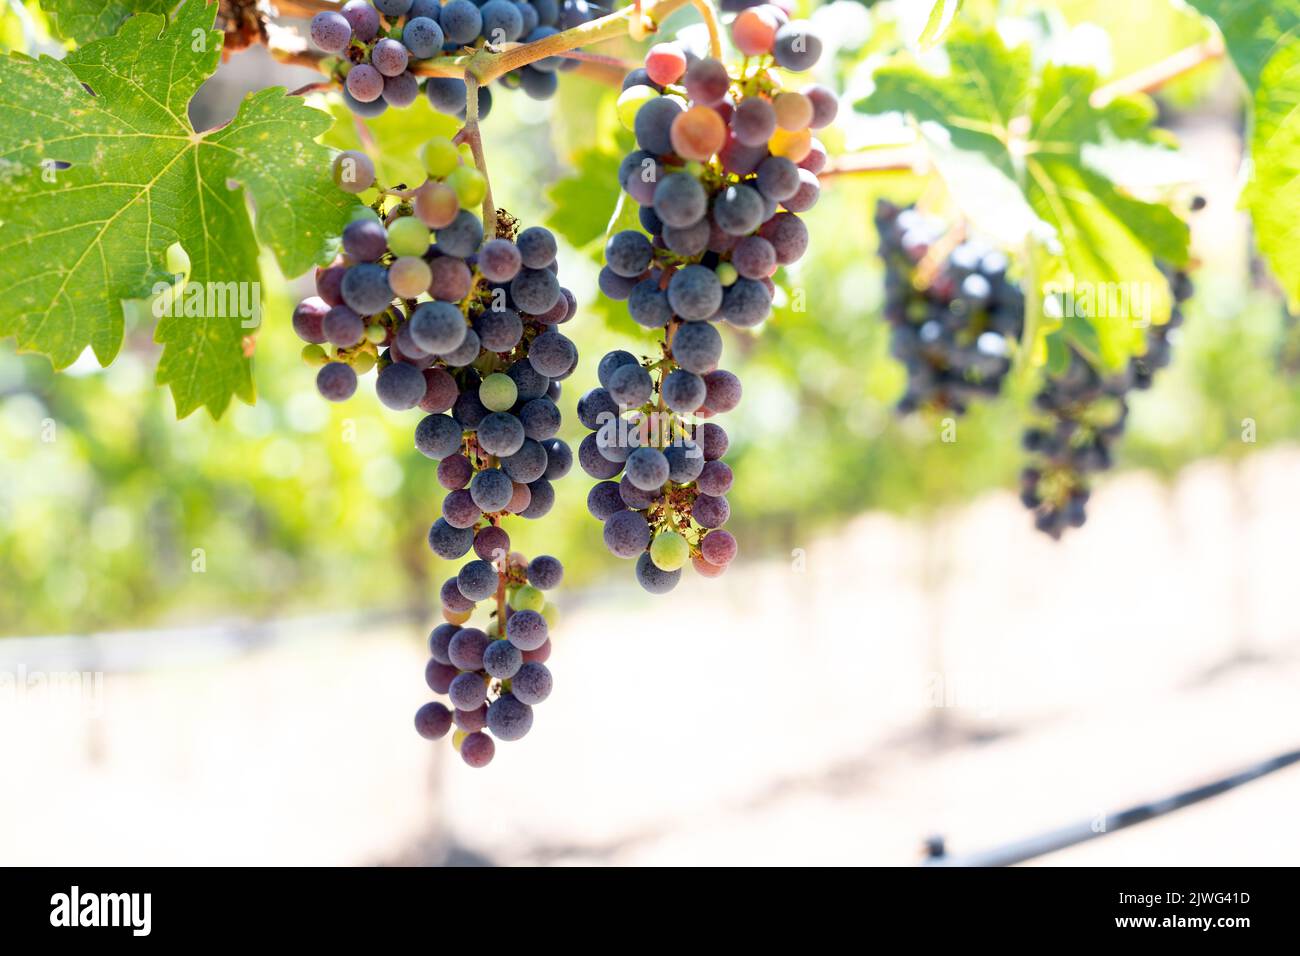 Close-up of bunches of ripe red wine grapes on vine Stock Photo